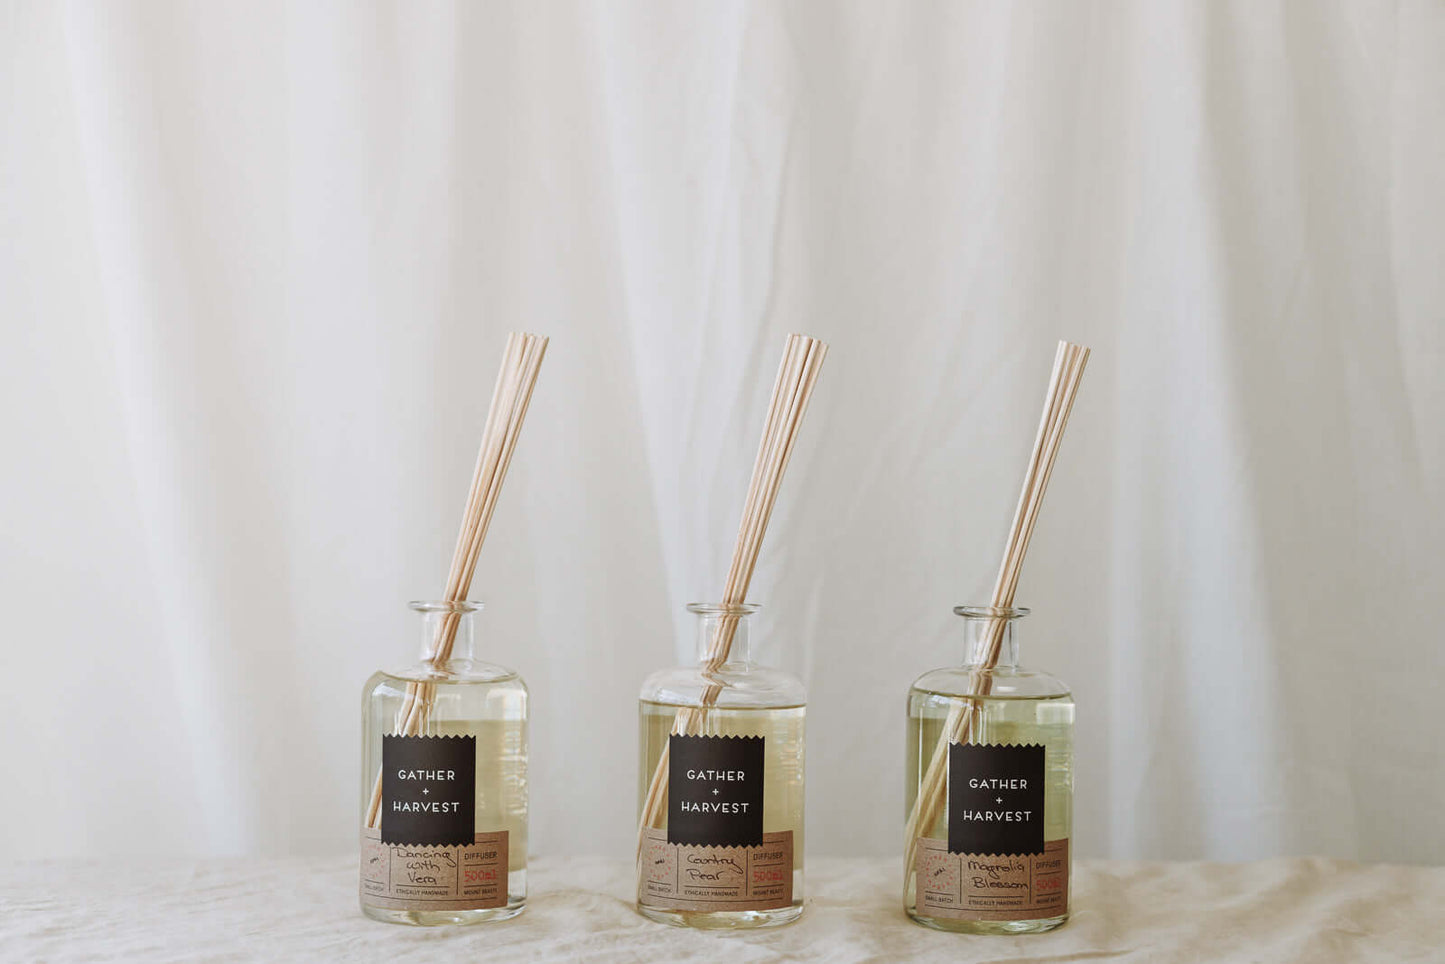 The best Country Pear Reed Diffuser in Australia. It adds a pleasant scent to your home creating a cozy atmosphere.